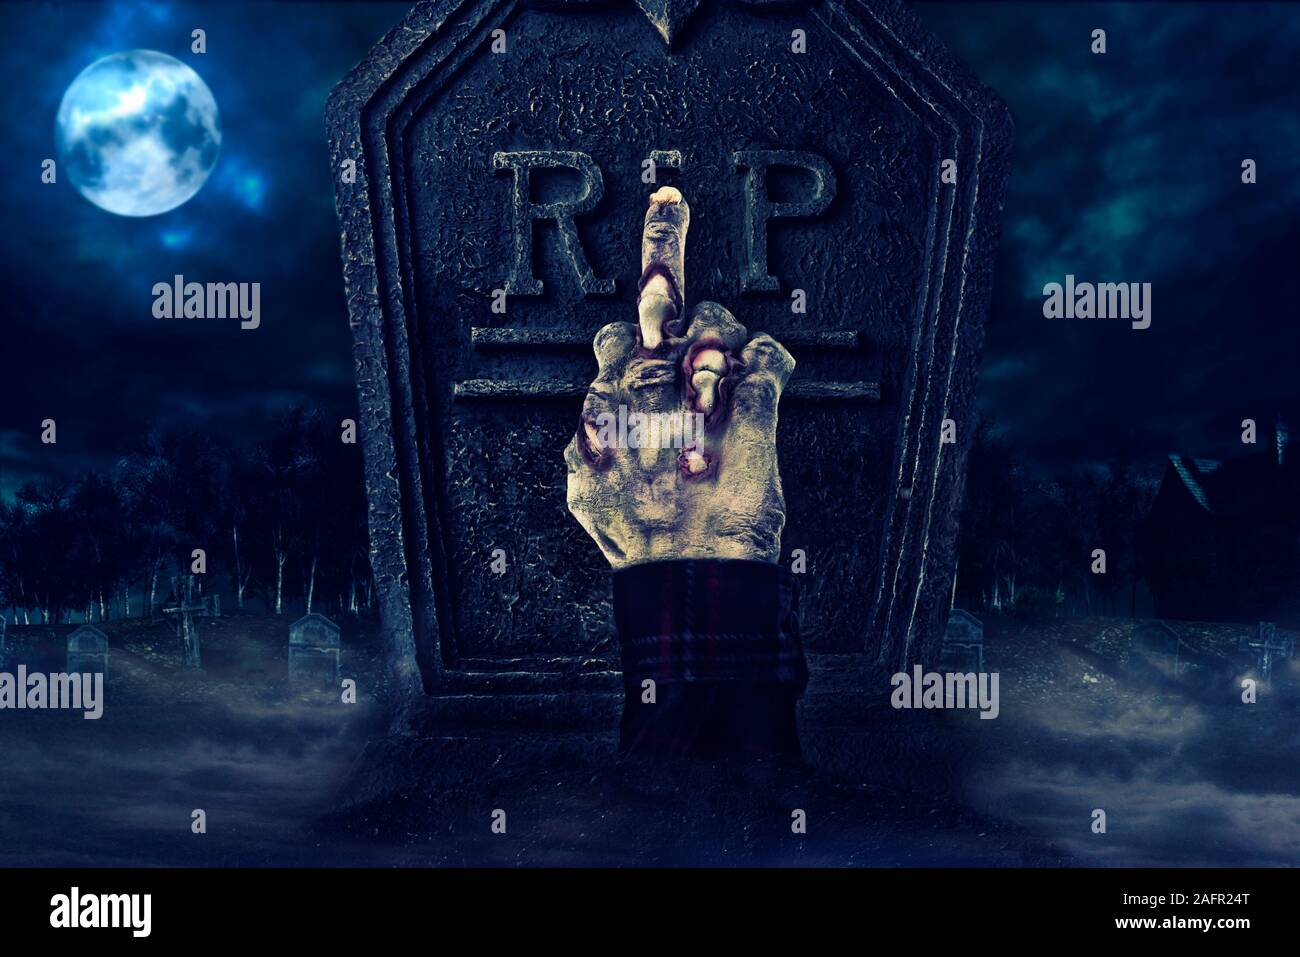 Zombie hand showing middle finger in front of tombstone, creepy cemetary in the background. Stock Photo